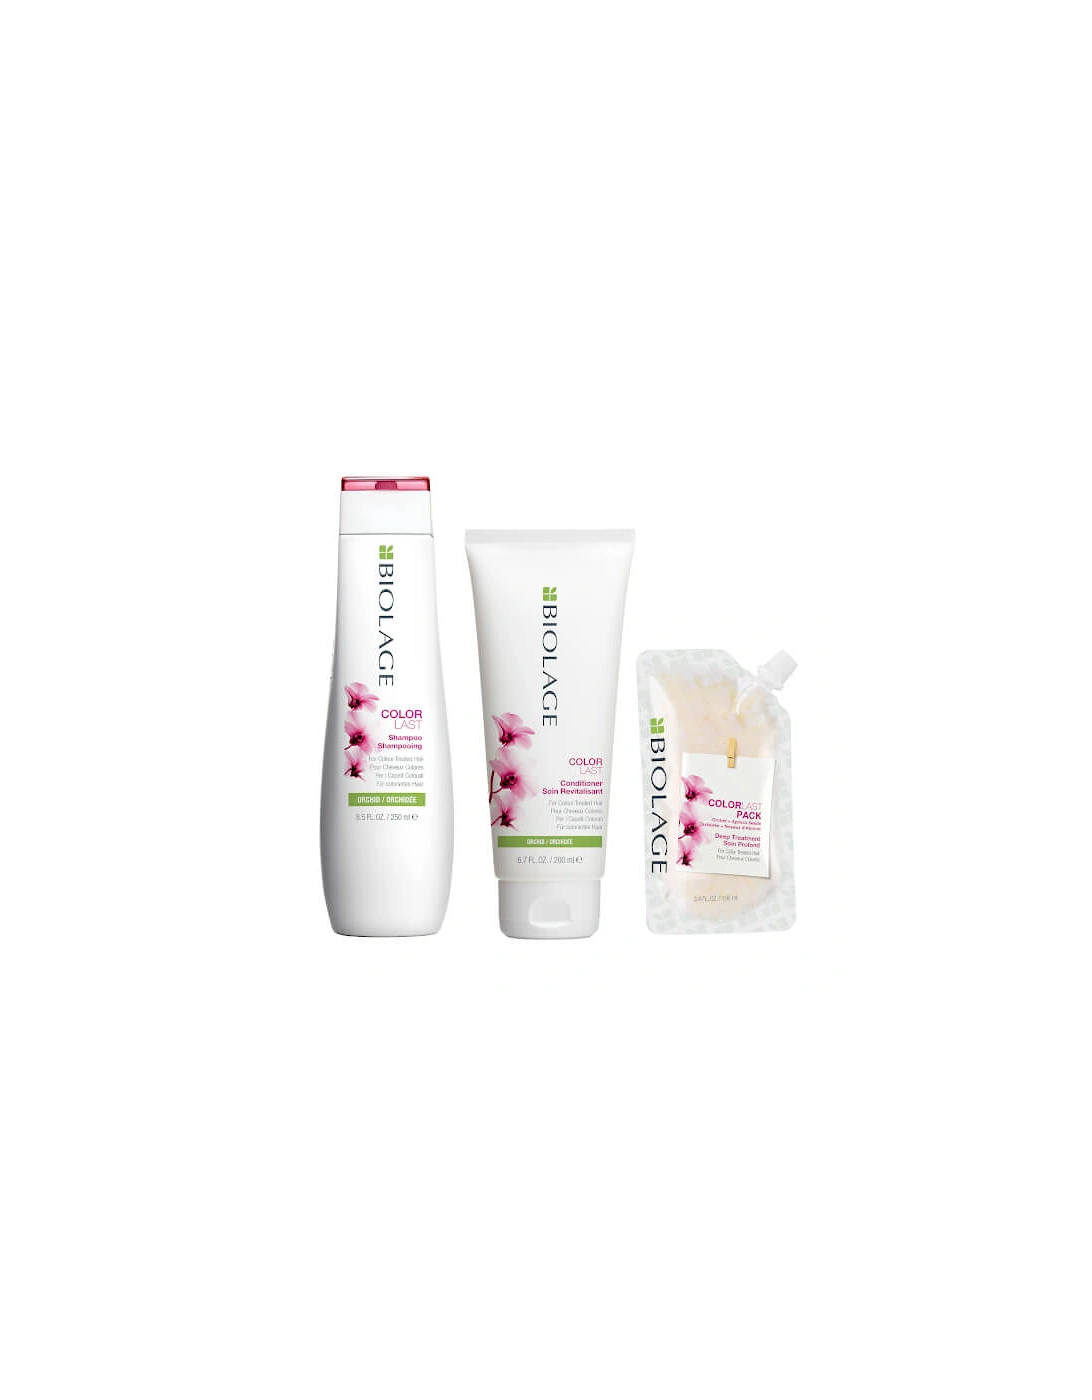 ColorLast Colour Protect Shampoo, Conditioner and Hair Mask for Coloured Hair Routine - Biolage, 2 of 1